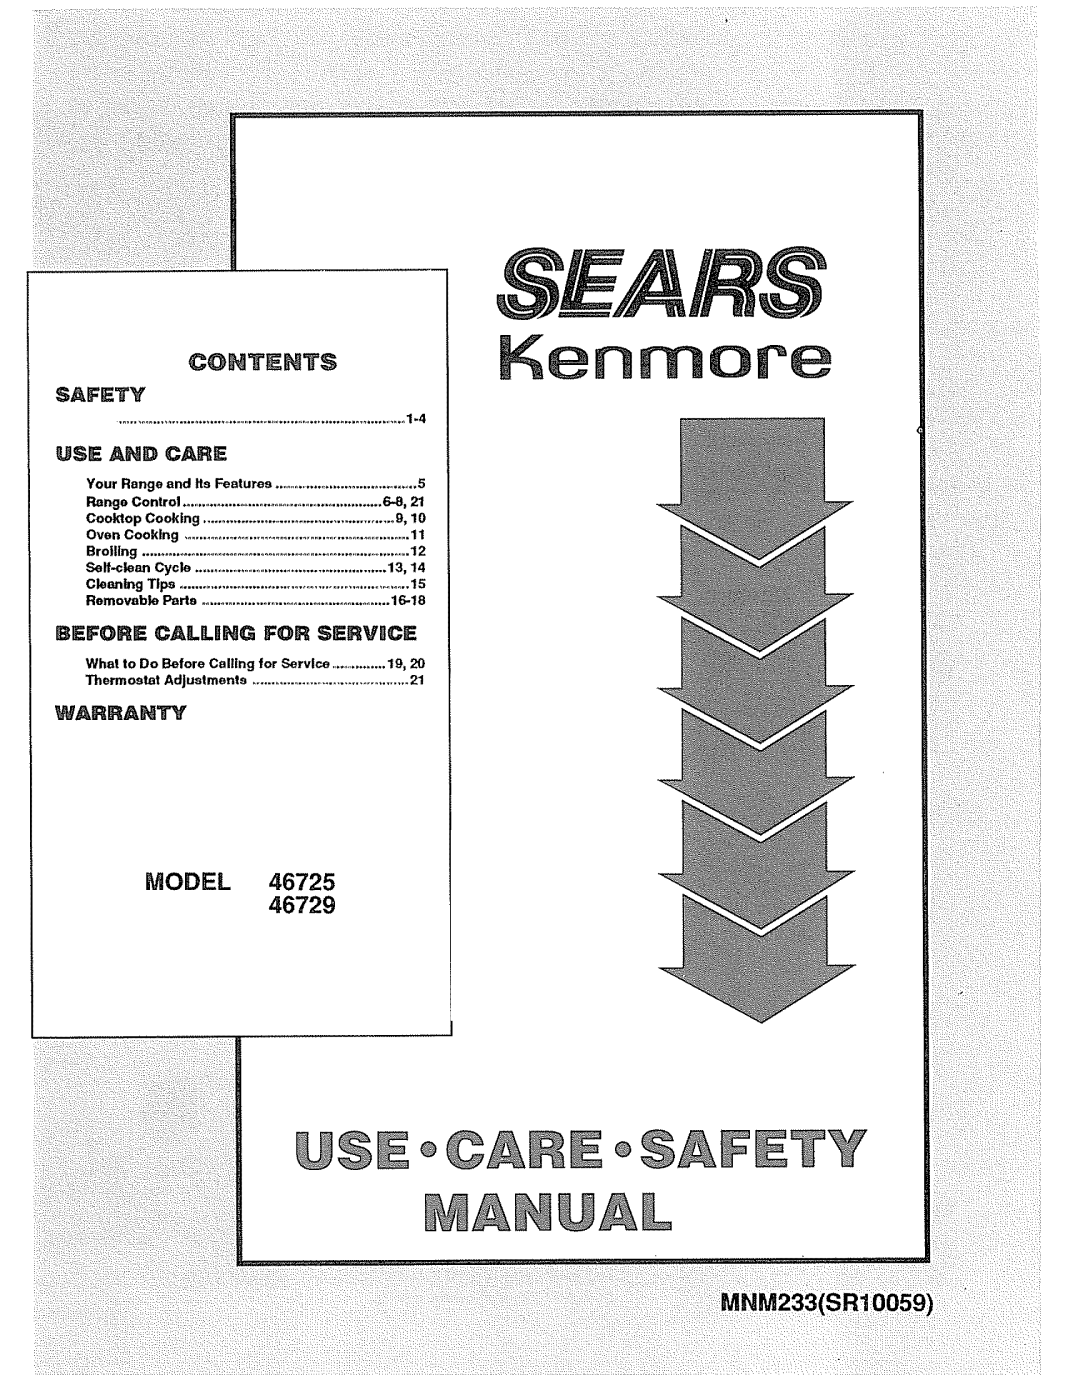 Sears 46725, 46729 manual Contents, Model, Safety, K nm 